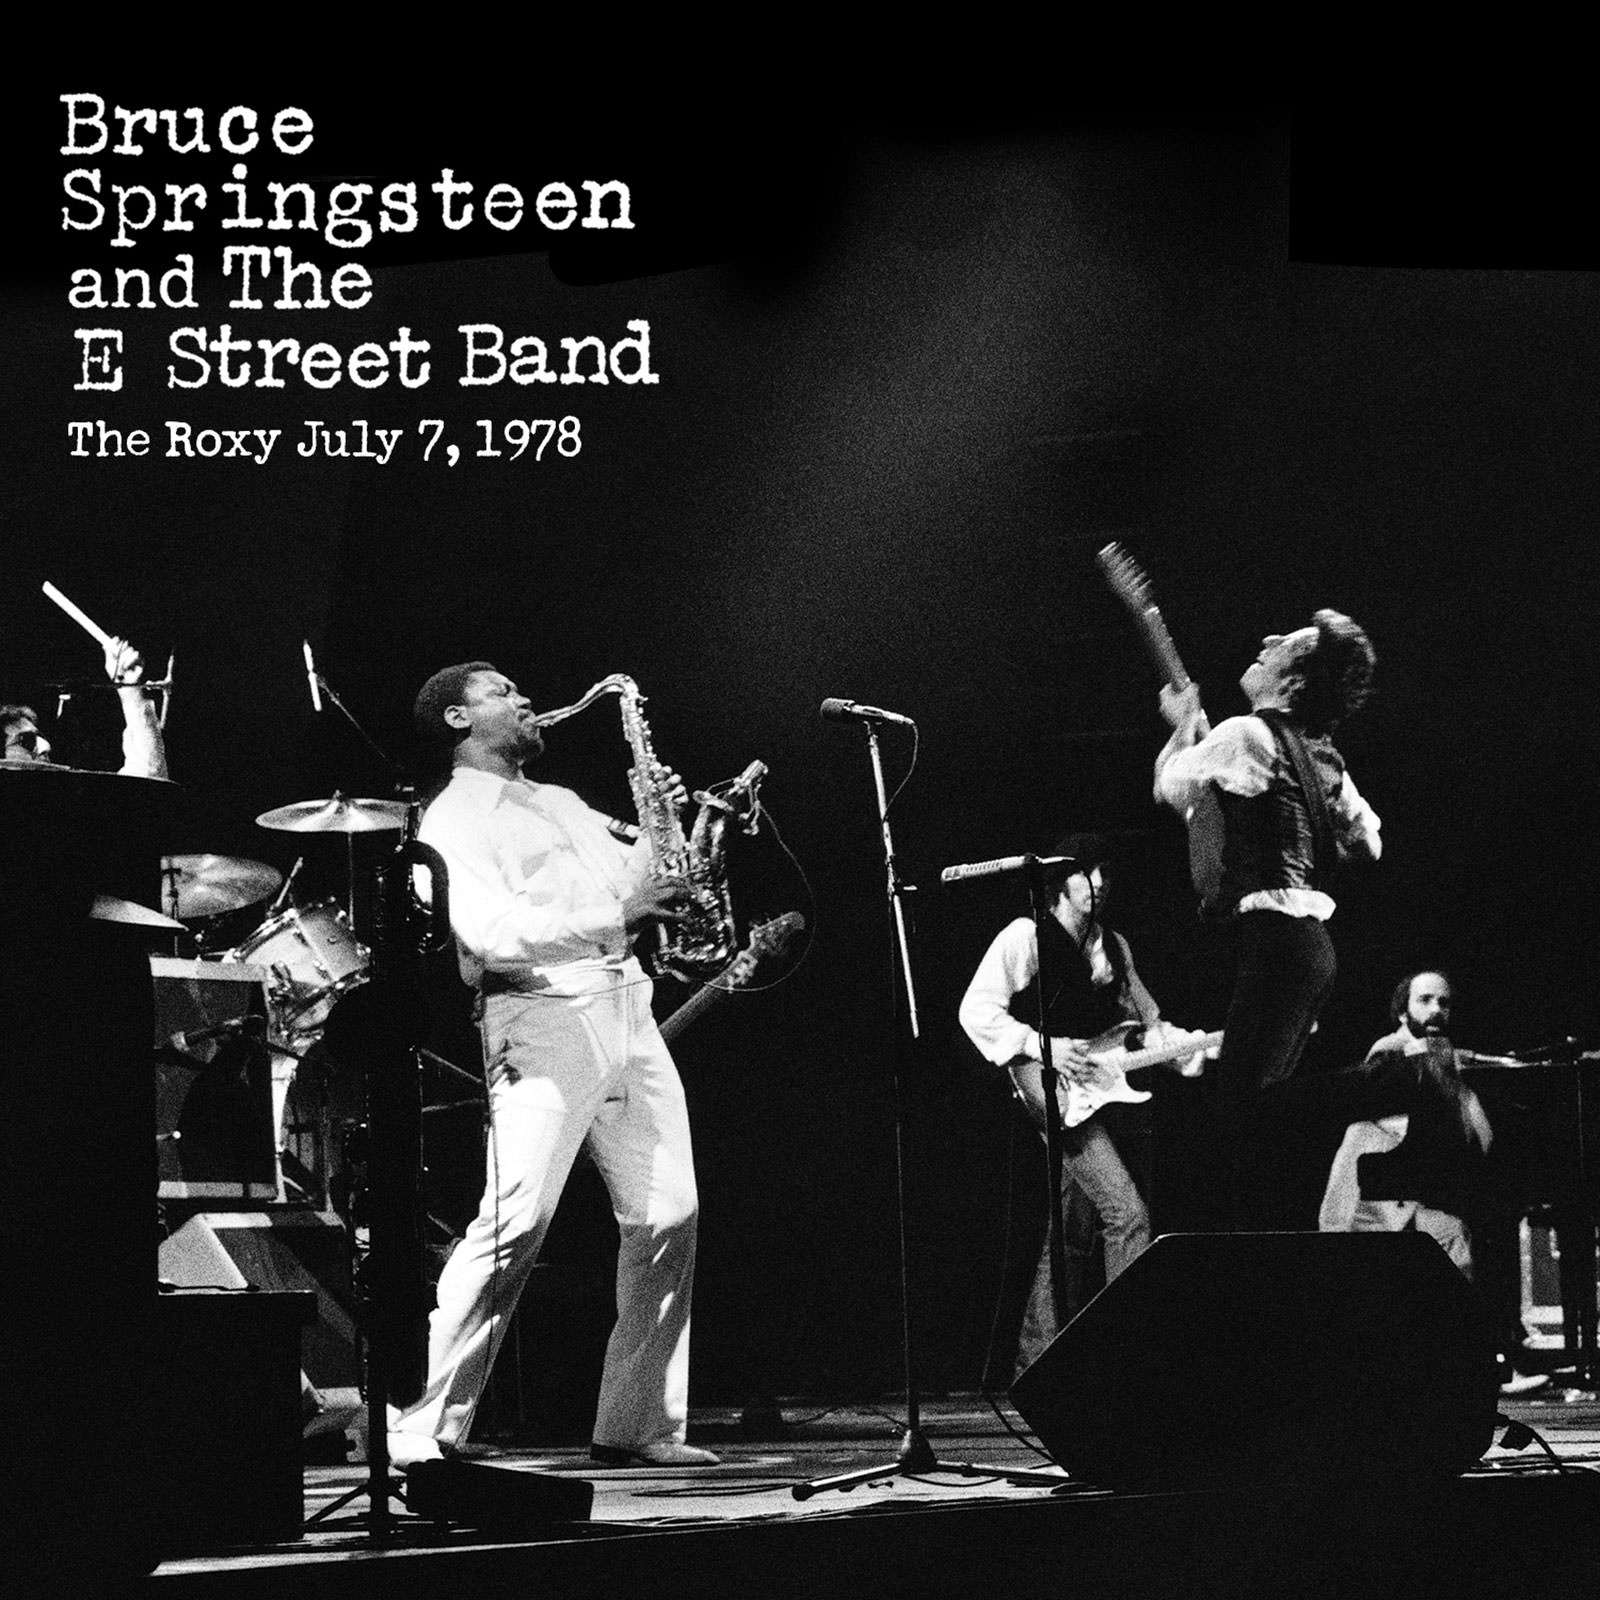 Bruce Springsteen & The E Street Band – The Roxy, West Hollywood, CA, July 07, 1978 (2018) [FLAC 24bit/192kHz]